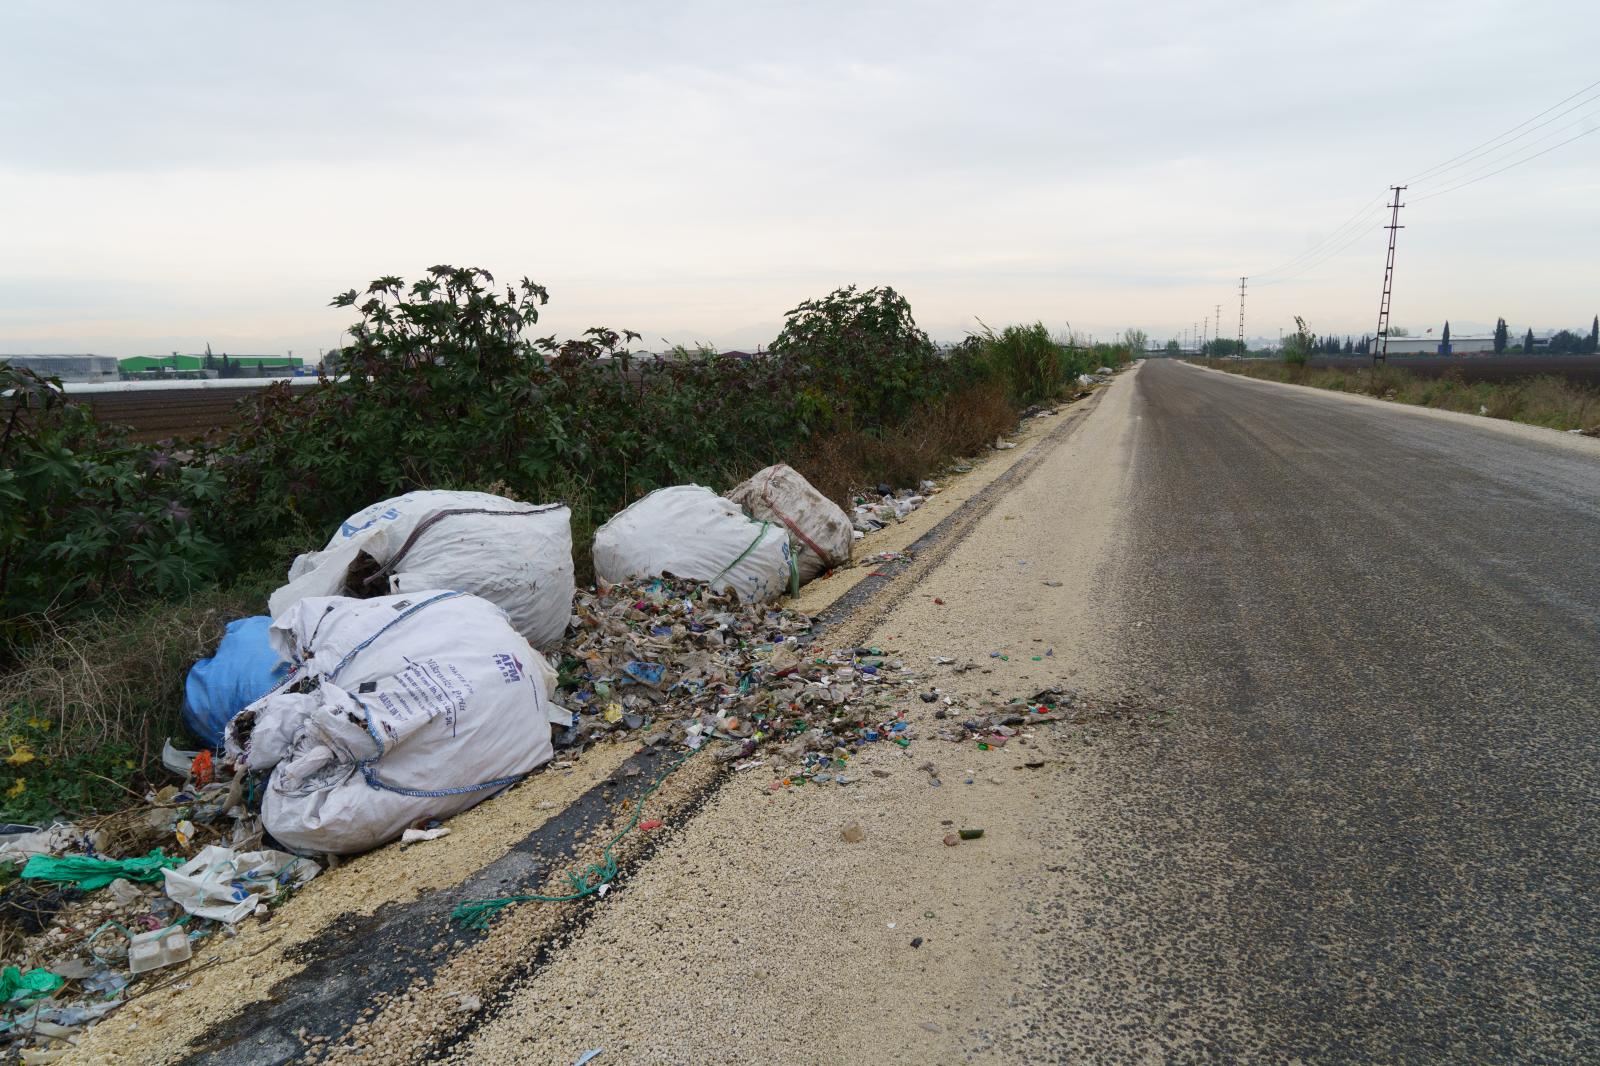  Plastic waste from England and...the river. Adana, Turkey 2021. 